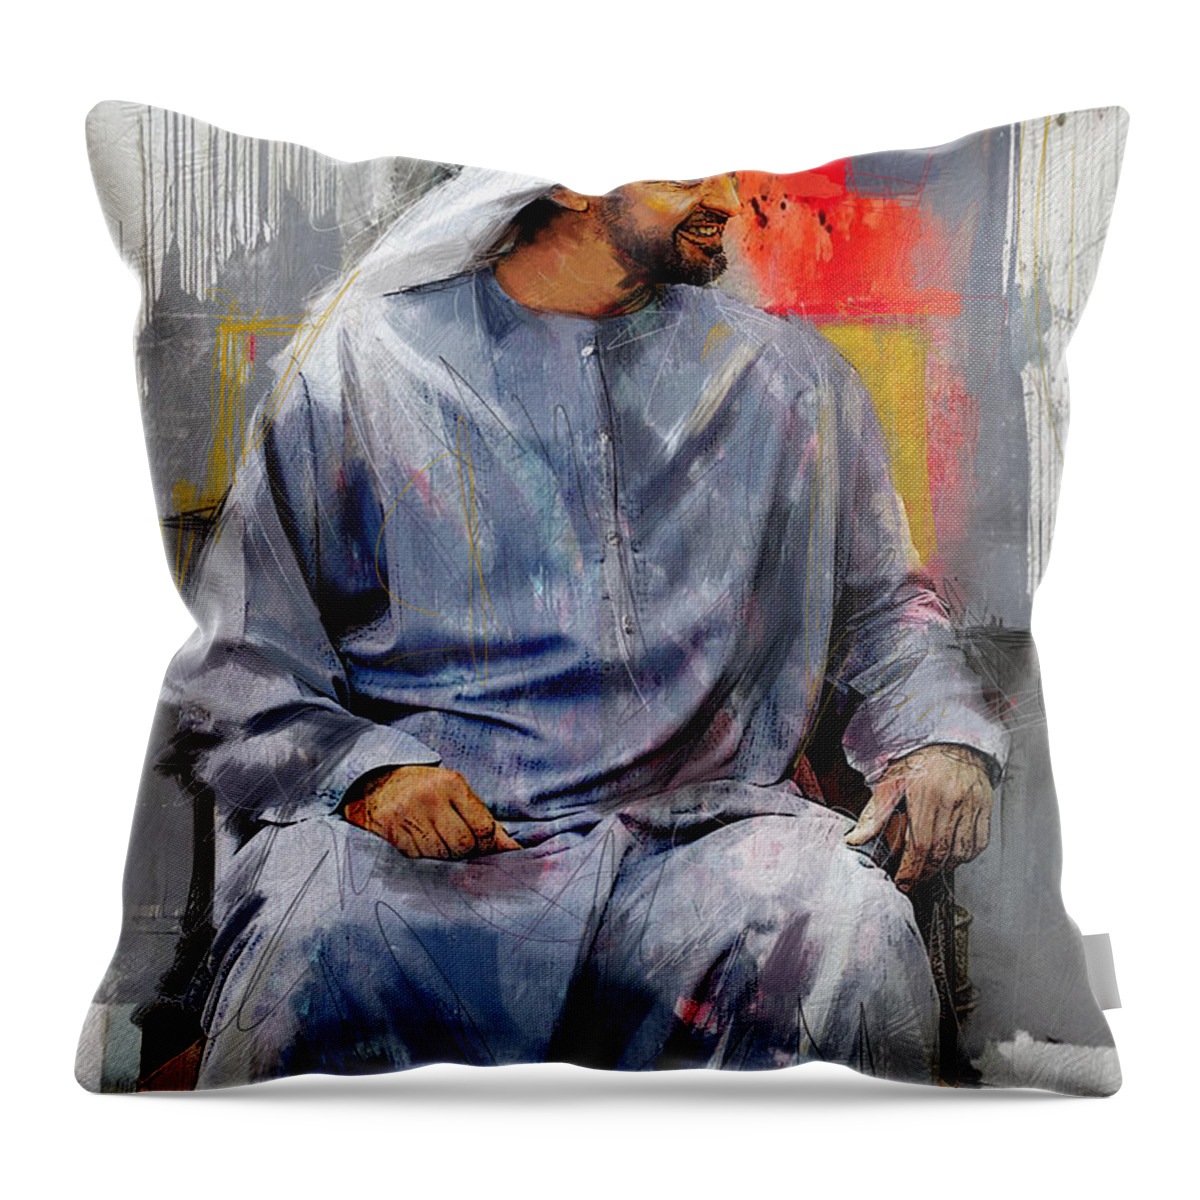 Uae Armed Forces Throw Pillow featuring the painting Portrait of Abdullah bin Zayed Al Nahyen 7 by Maryam Mughal